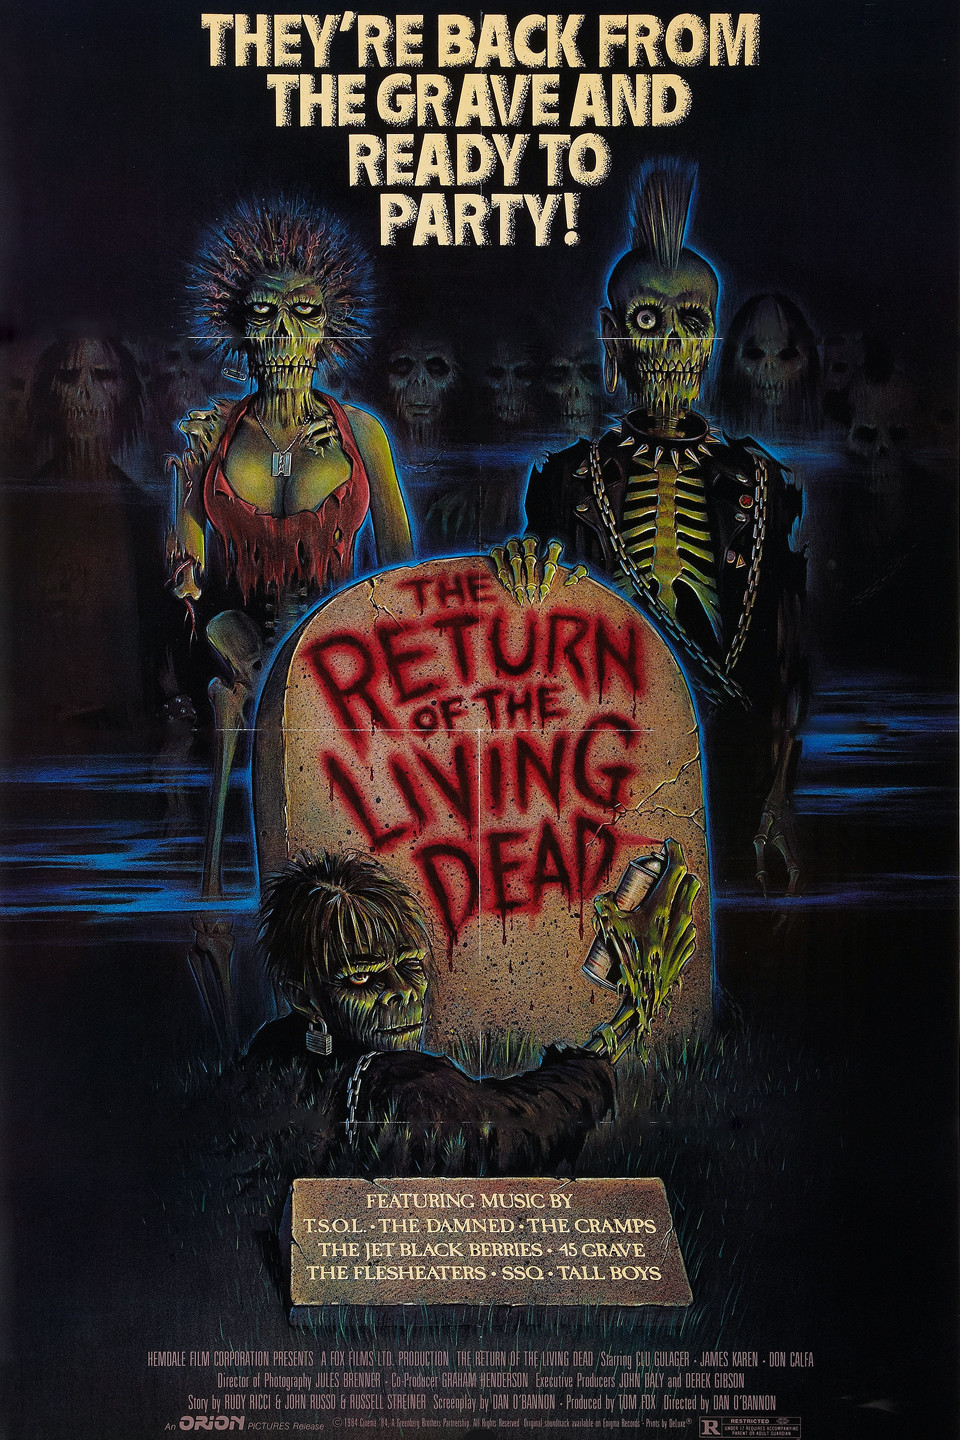 The Zombies That Started It All: Remembering Return of The Living Dead